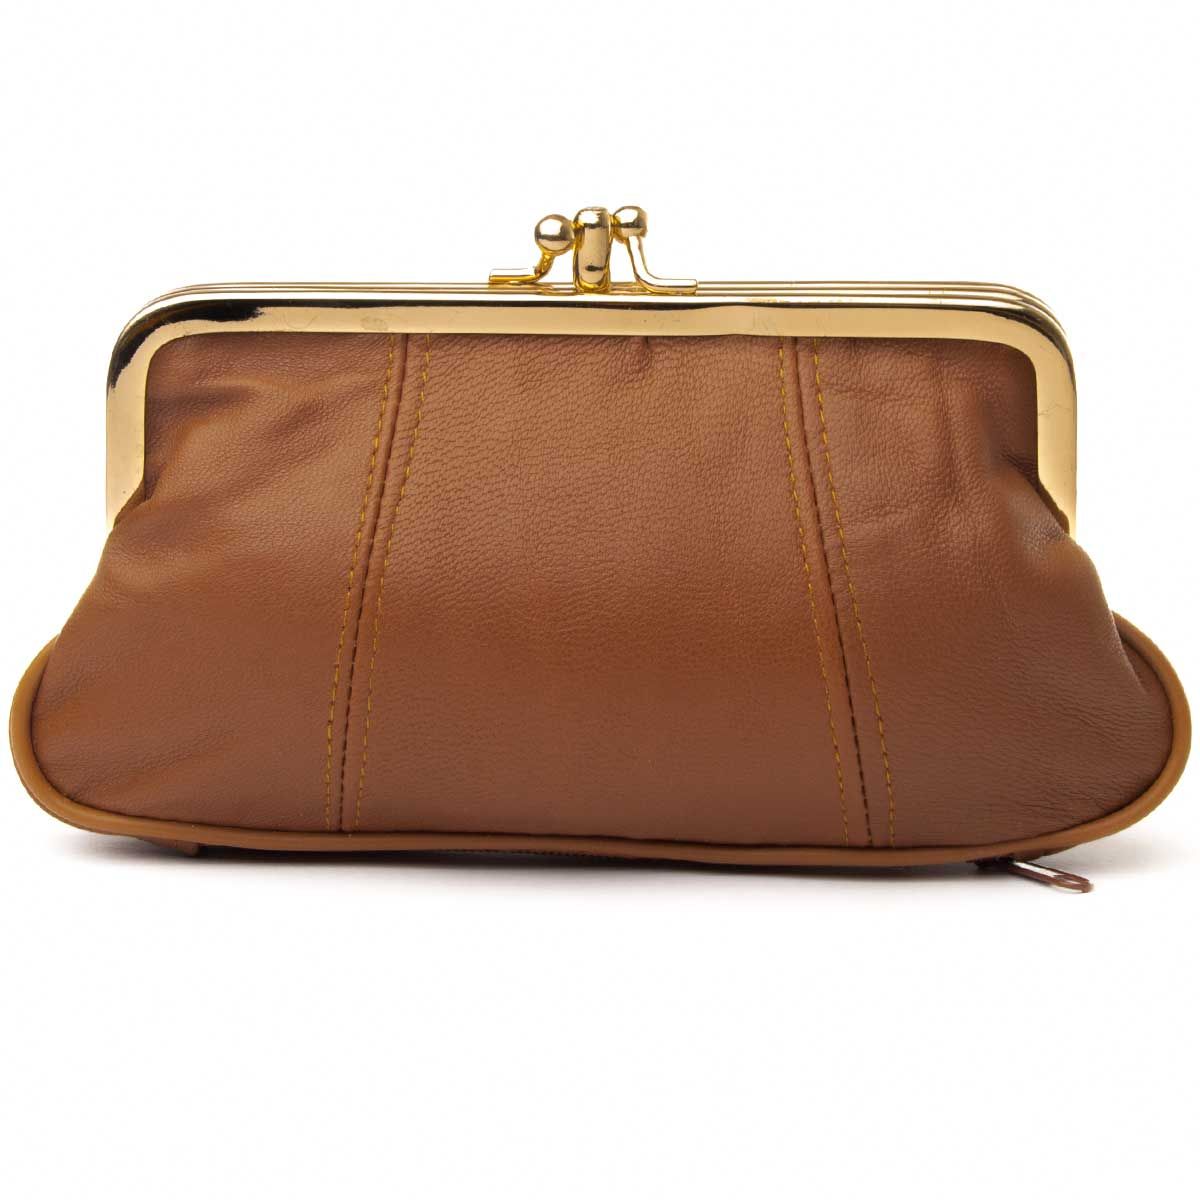 Measure: 10 * 17 * 2 cm. Women's purse, made of leather with closure closure. It is very flexible and comes doubly sewn. It has two exterior pockets with zip and two independent interior departments, lined with textiles. Very practical and comfortable. 100% natural skin.